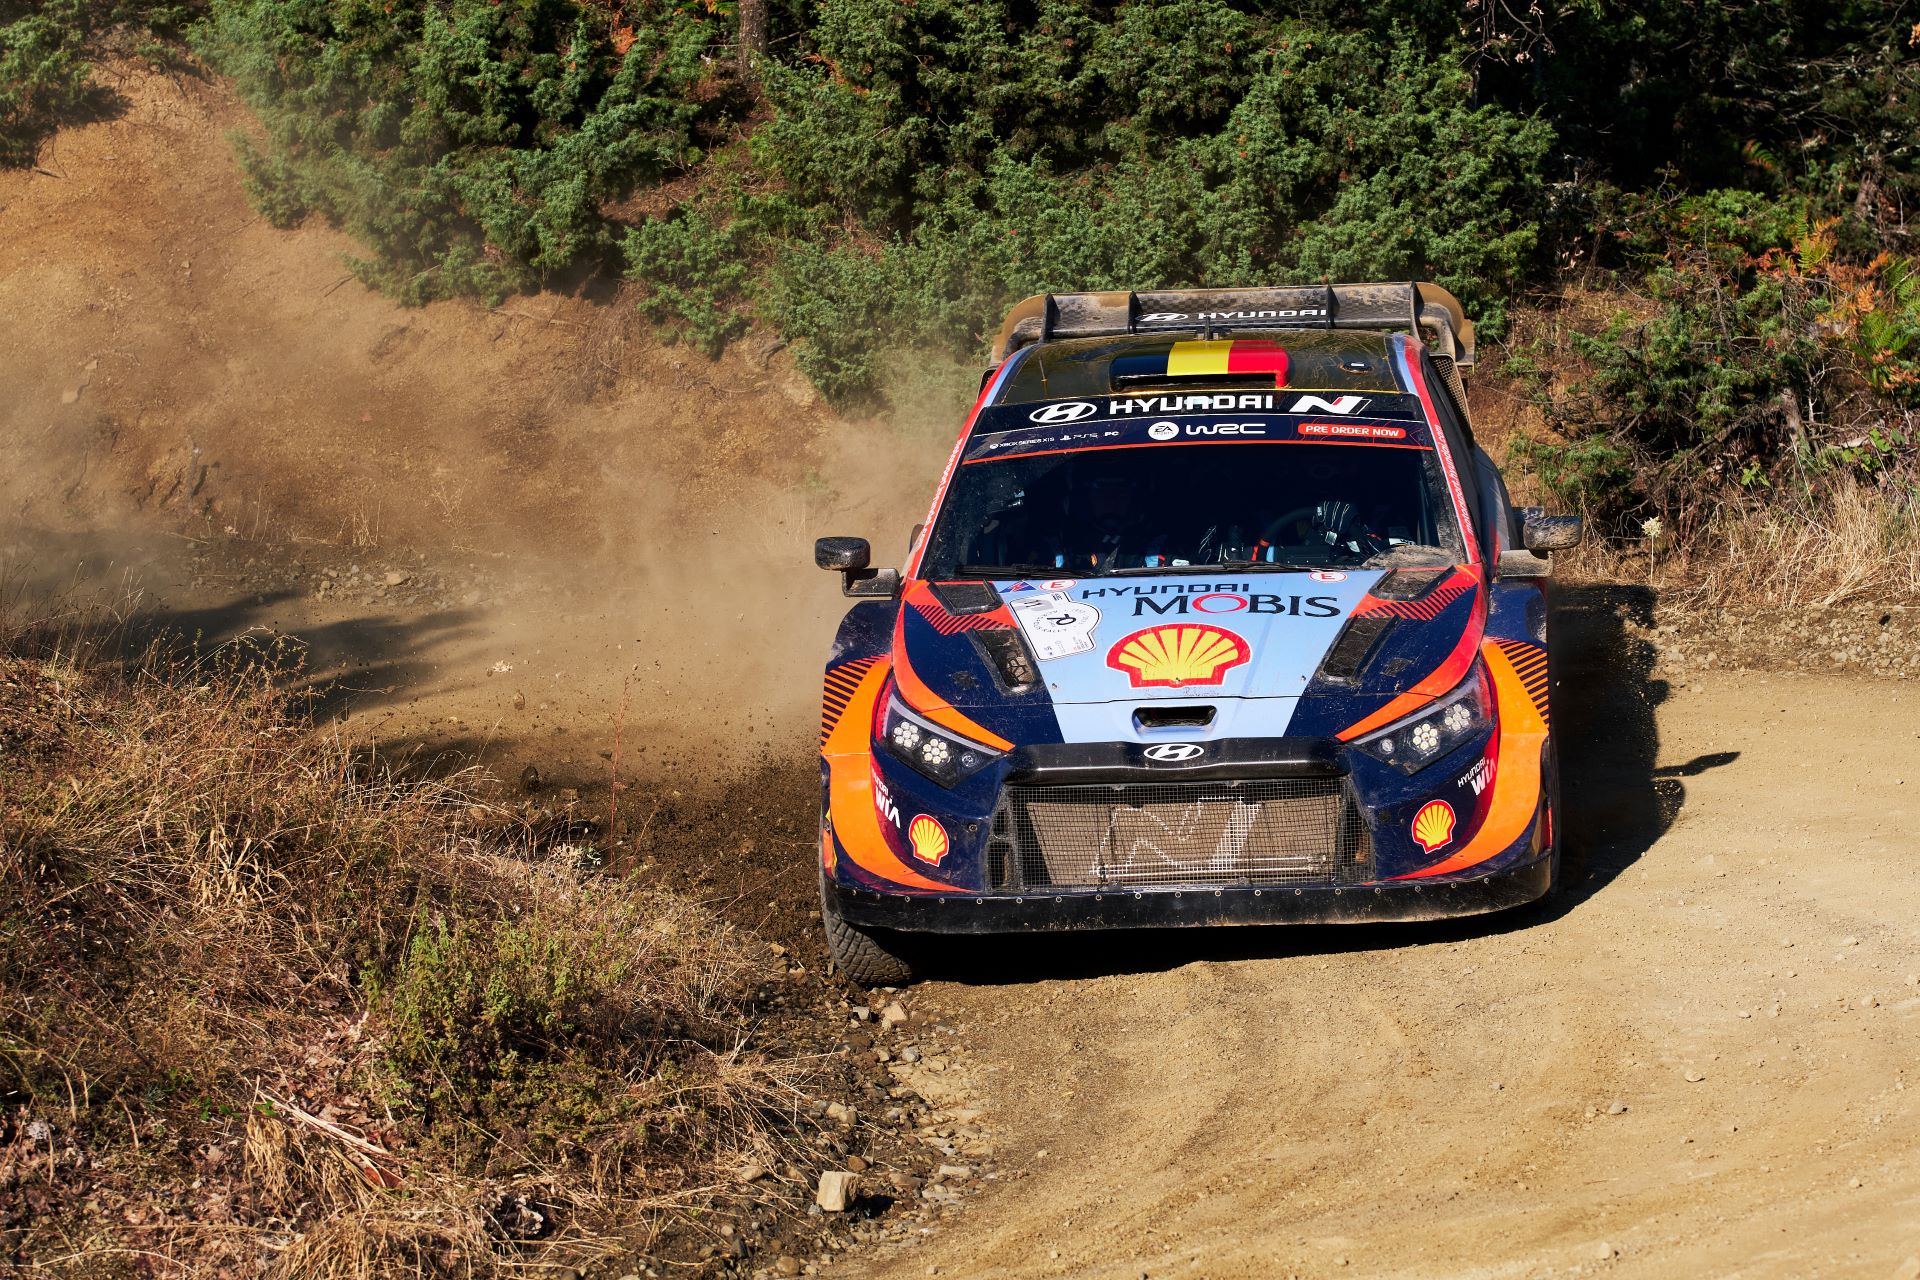 Can Hyundai end on podium again in Rally Chile?